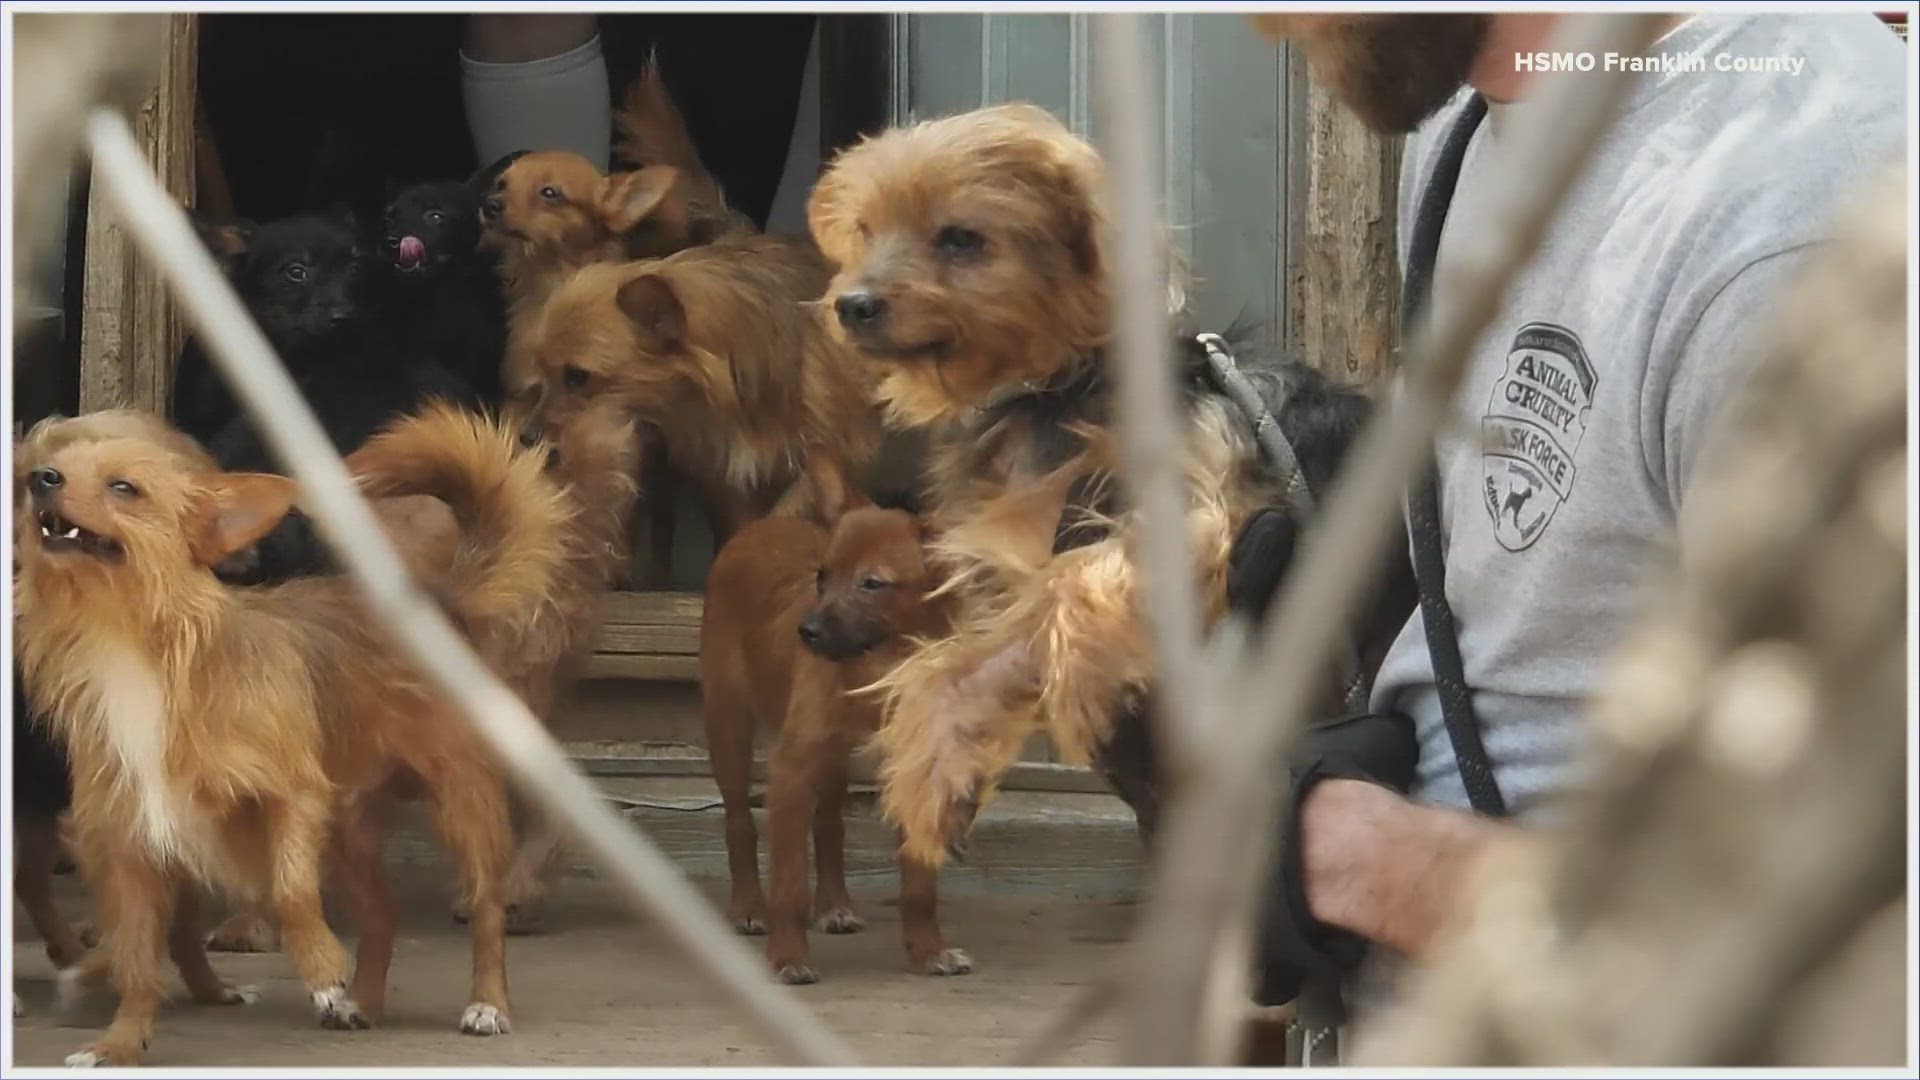 Sixty-three dogs and puppies were rescued from a hoarding situation in Franklin County on Thursday. They were taken to HSMO's St. Louis headquarters for treatment.